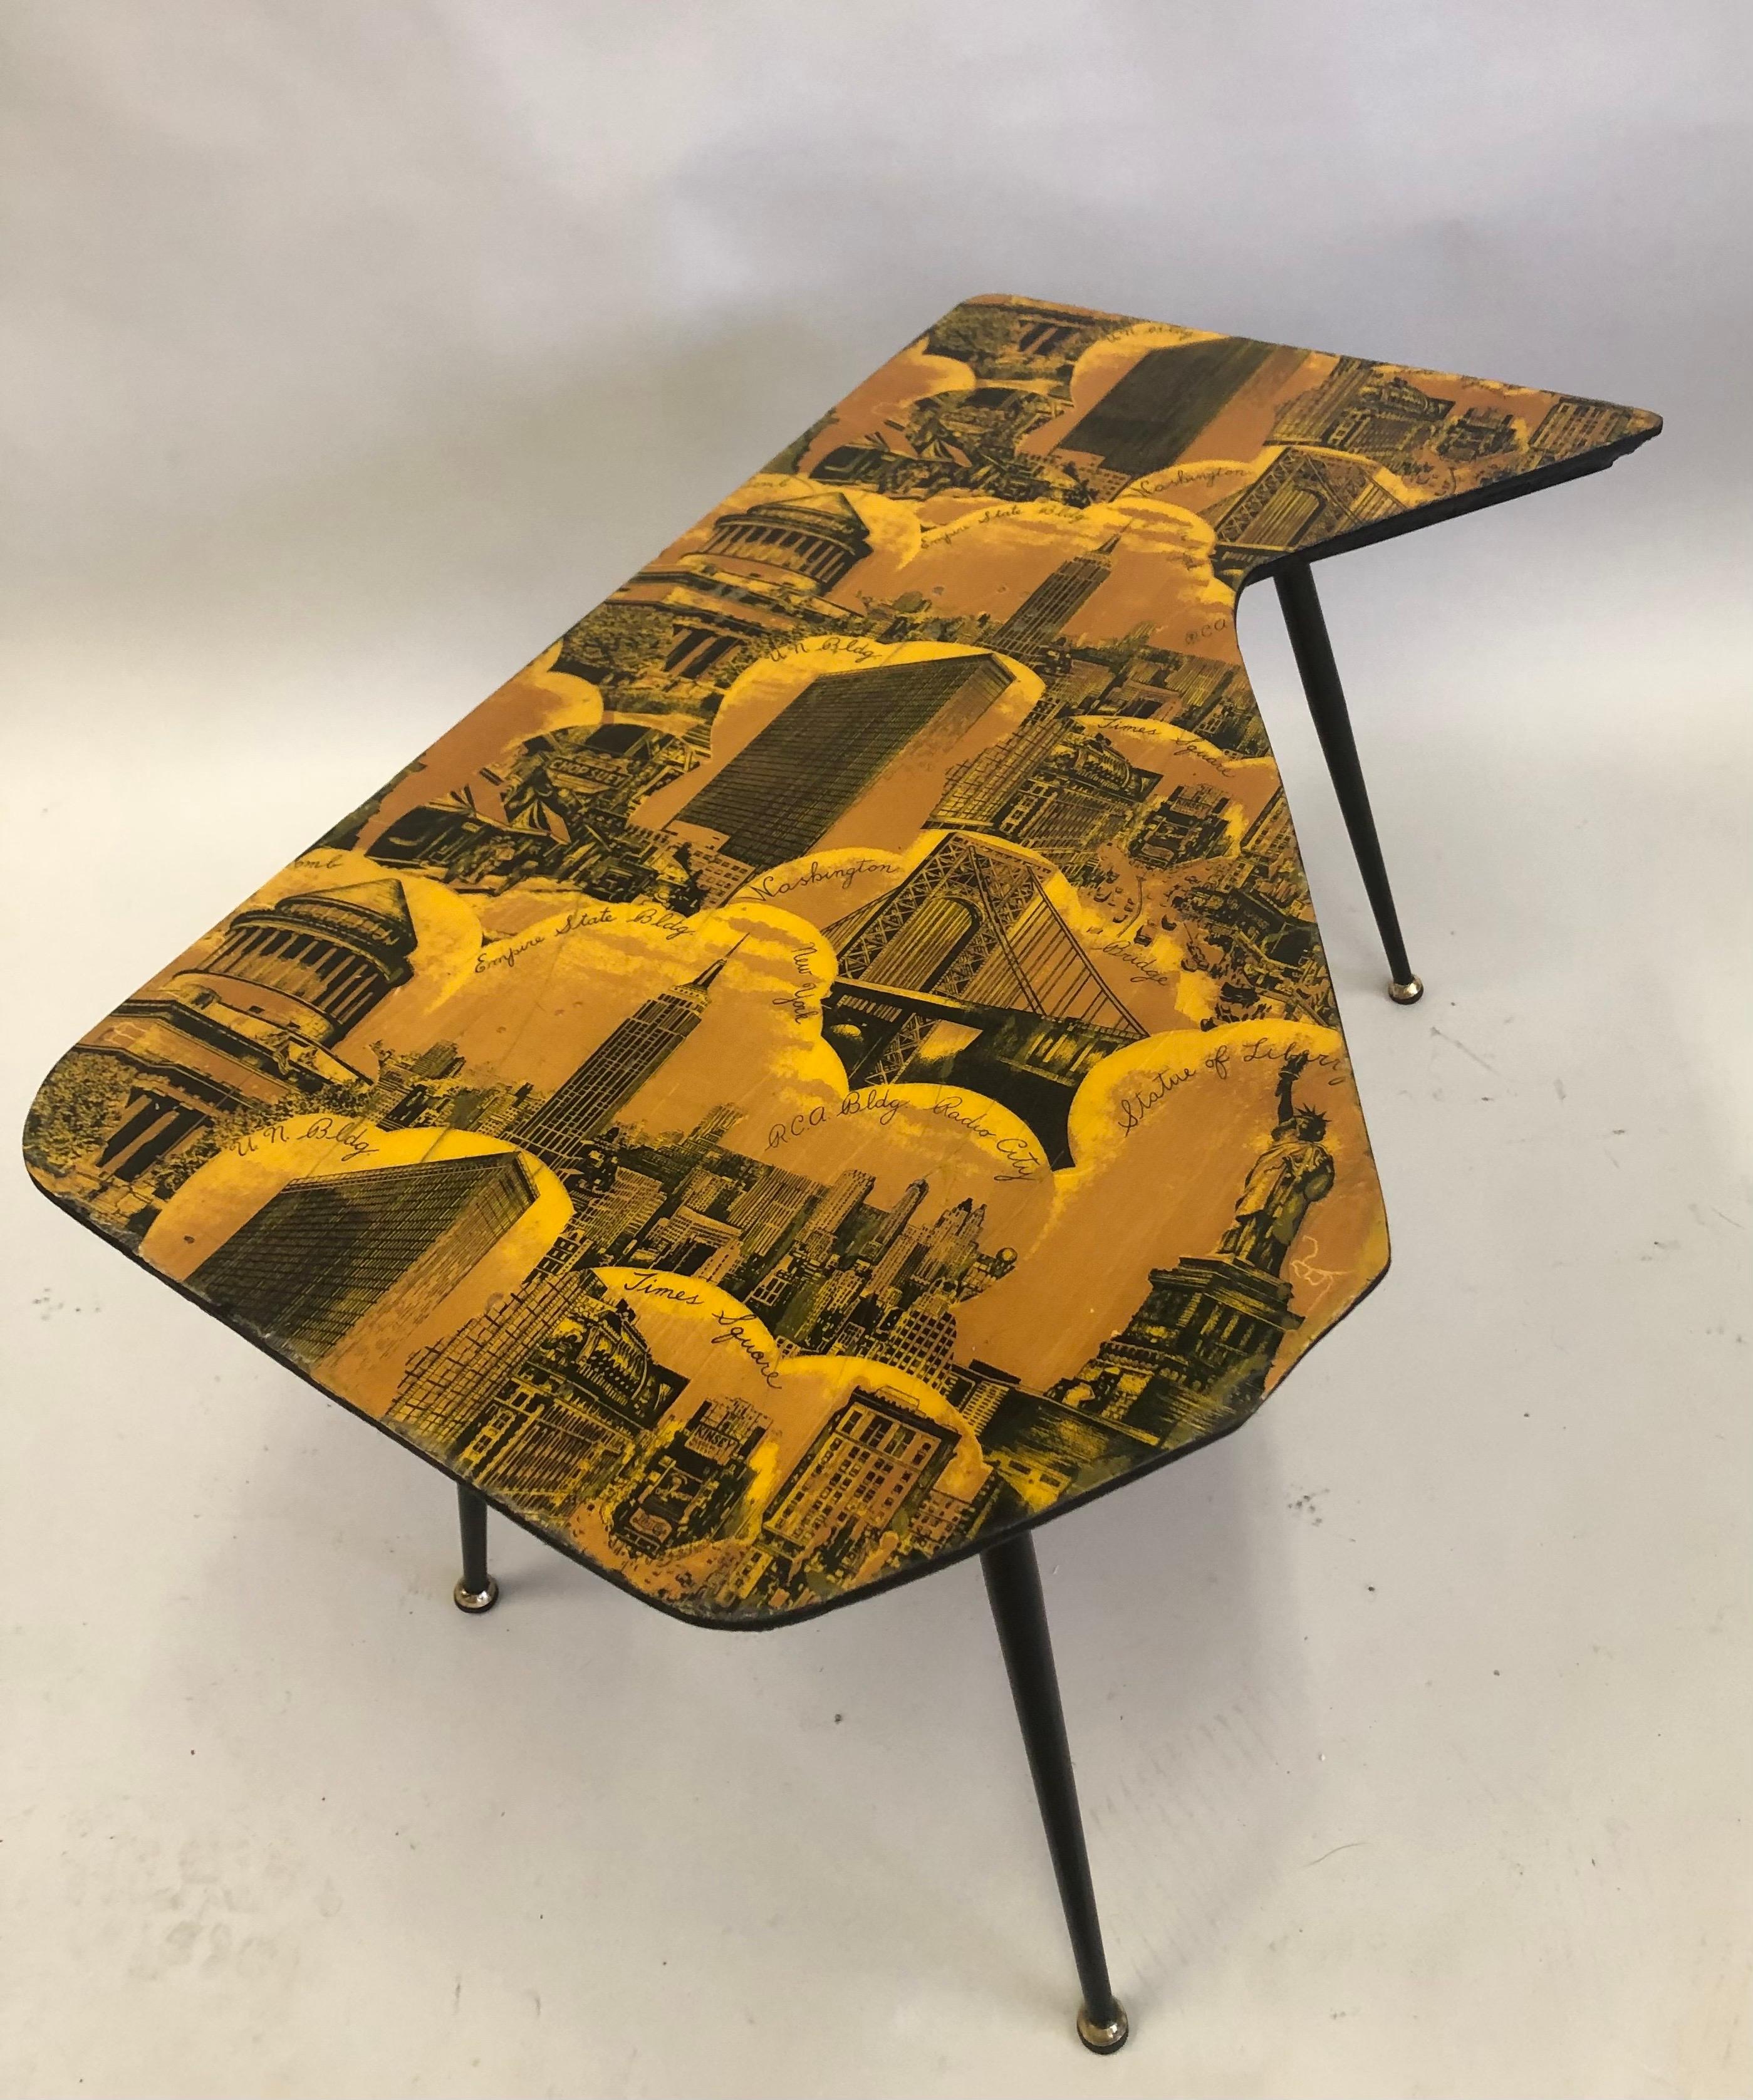 Italian Mid-Century Modern coffee table attributed to Piero Fornasetti. The table suspended on 4 angled black metal legs with a dynamic screen printed and lacquered top featuring the landmarks of New York City, circa 1950. Thus, in addition to its